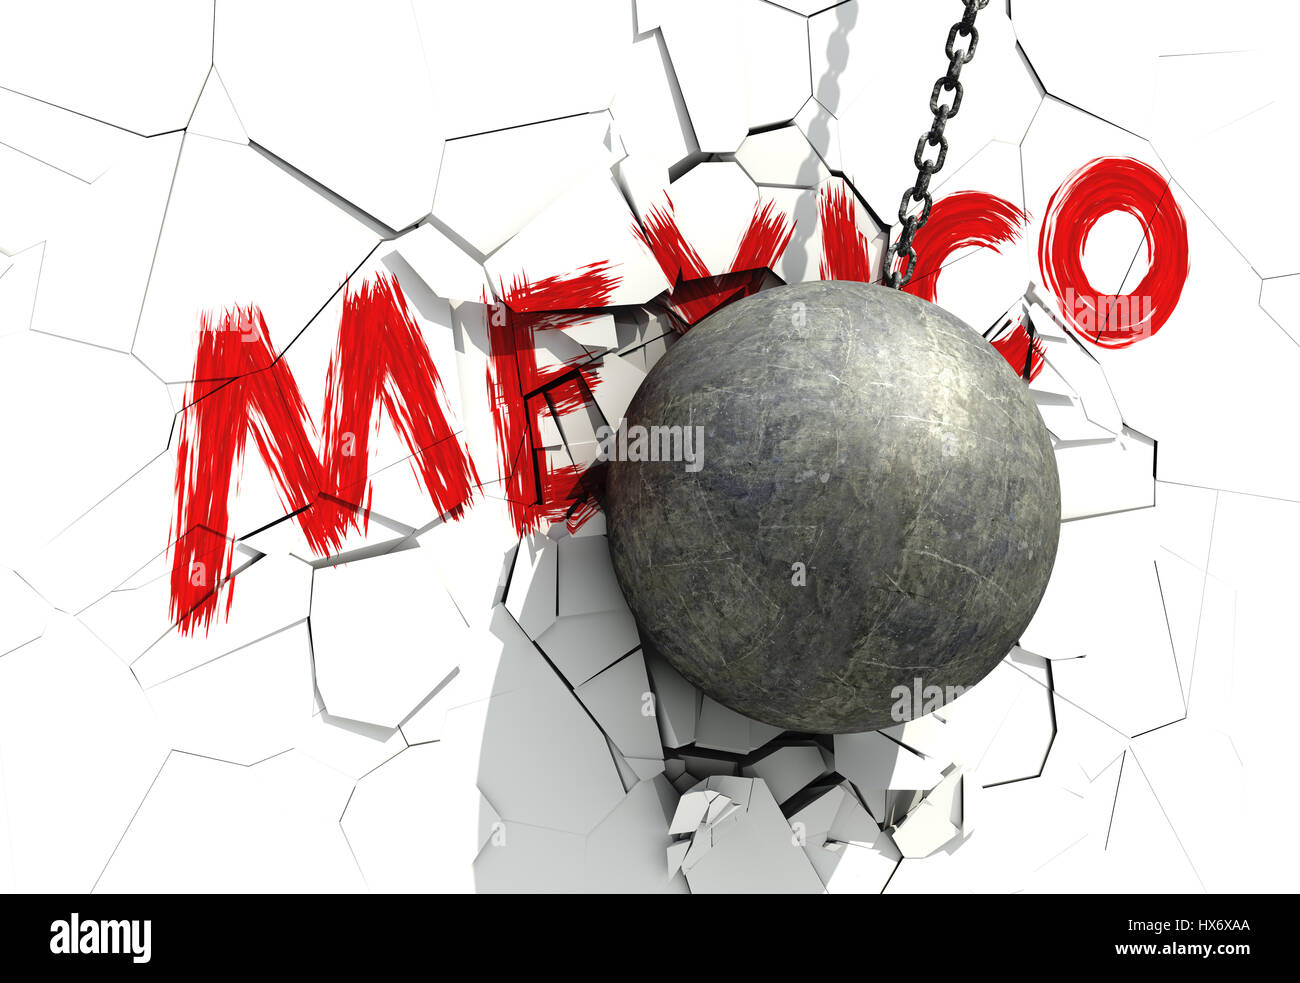 Metallic Wrecking Ball Shattering White Wall With Red Inscription . 3D Illustration. Stock Photo